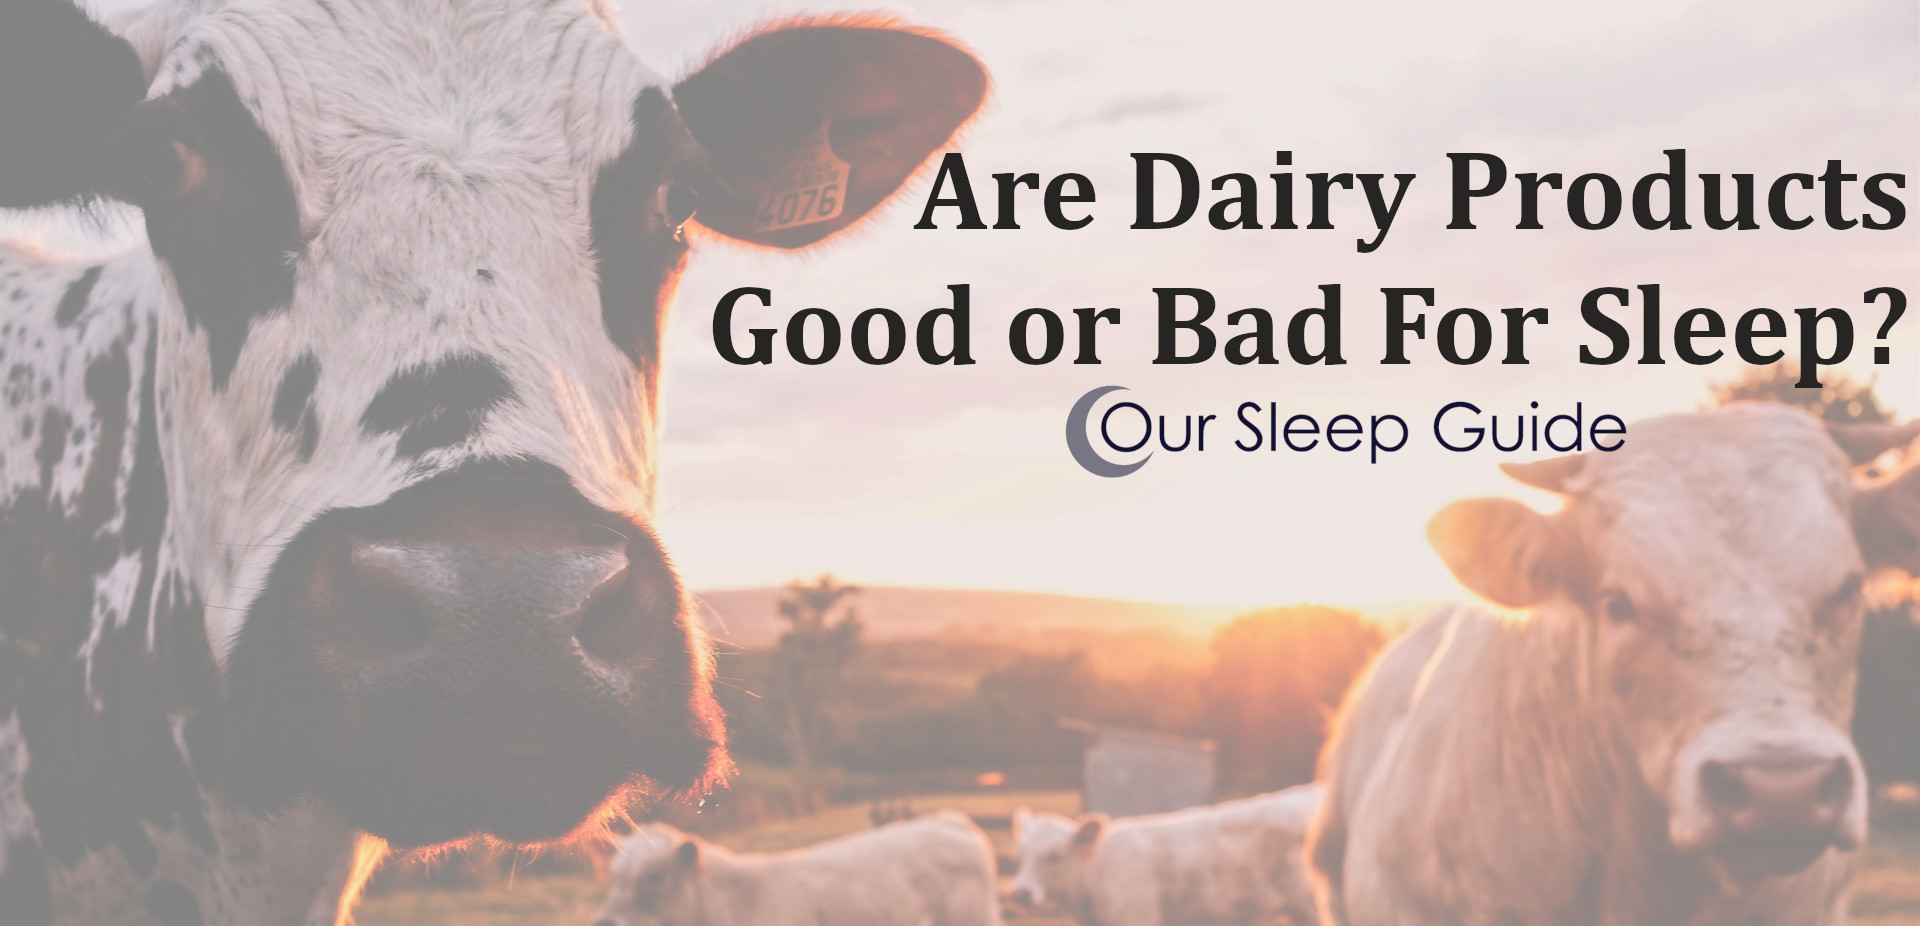 dairy products good for sleep?